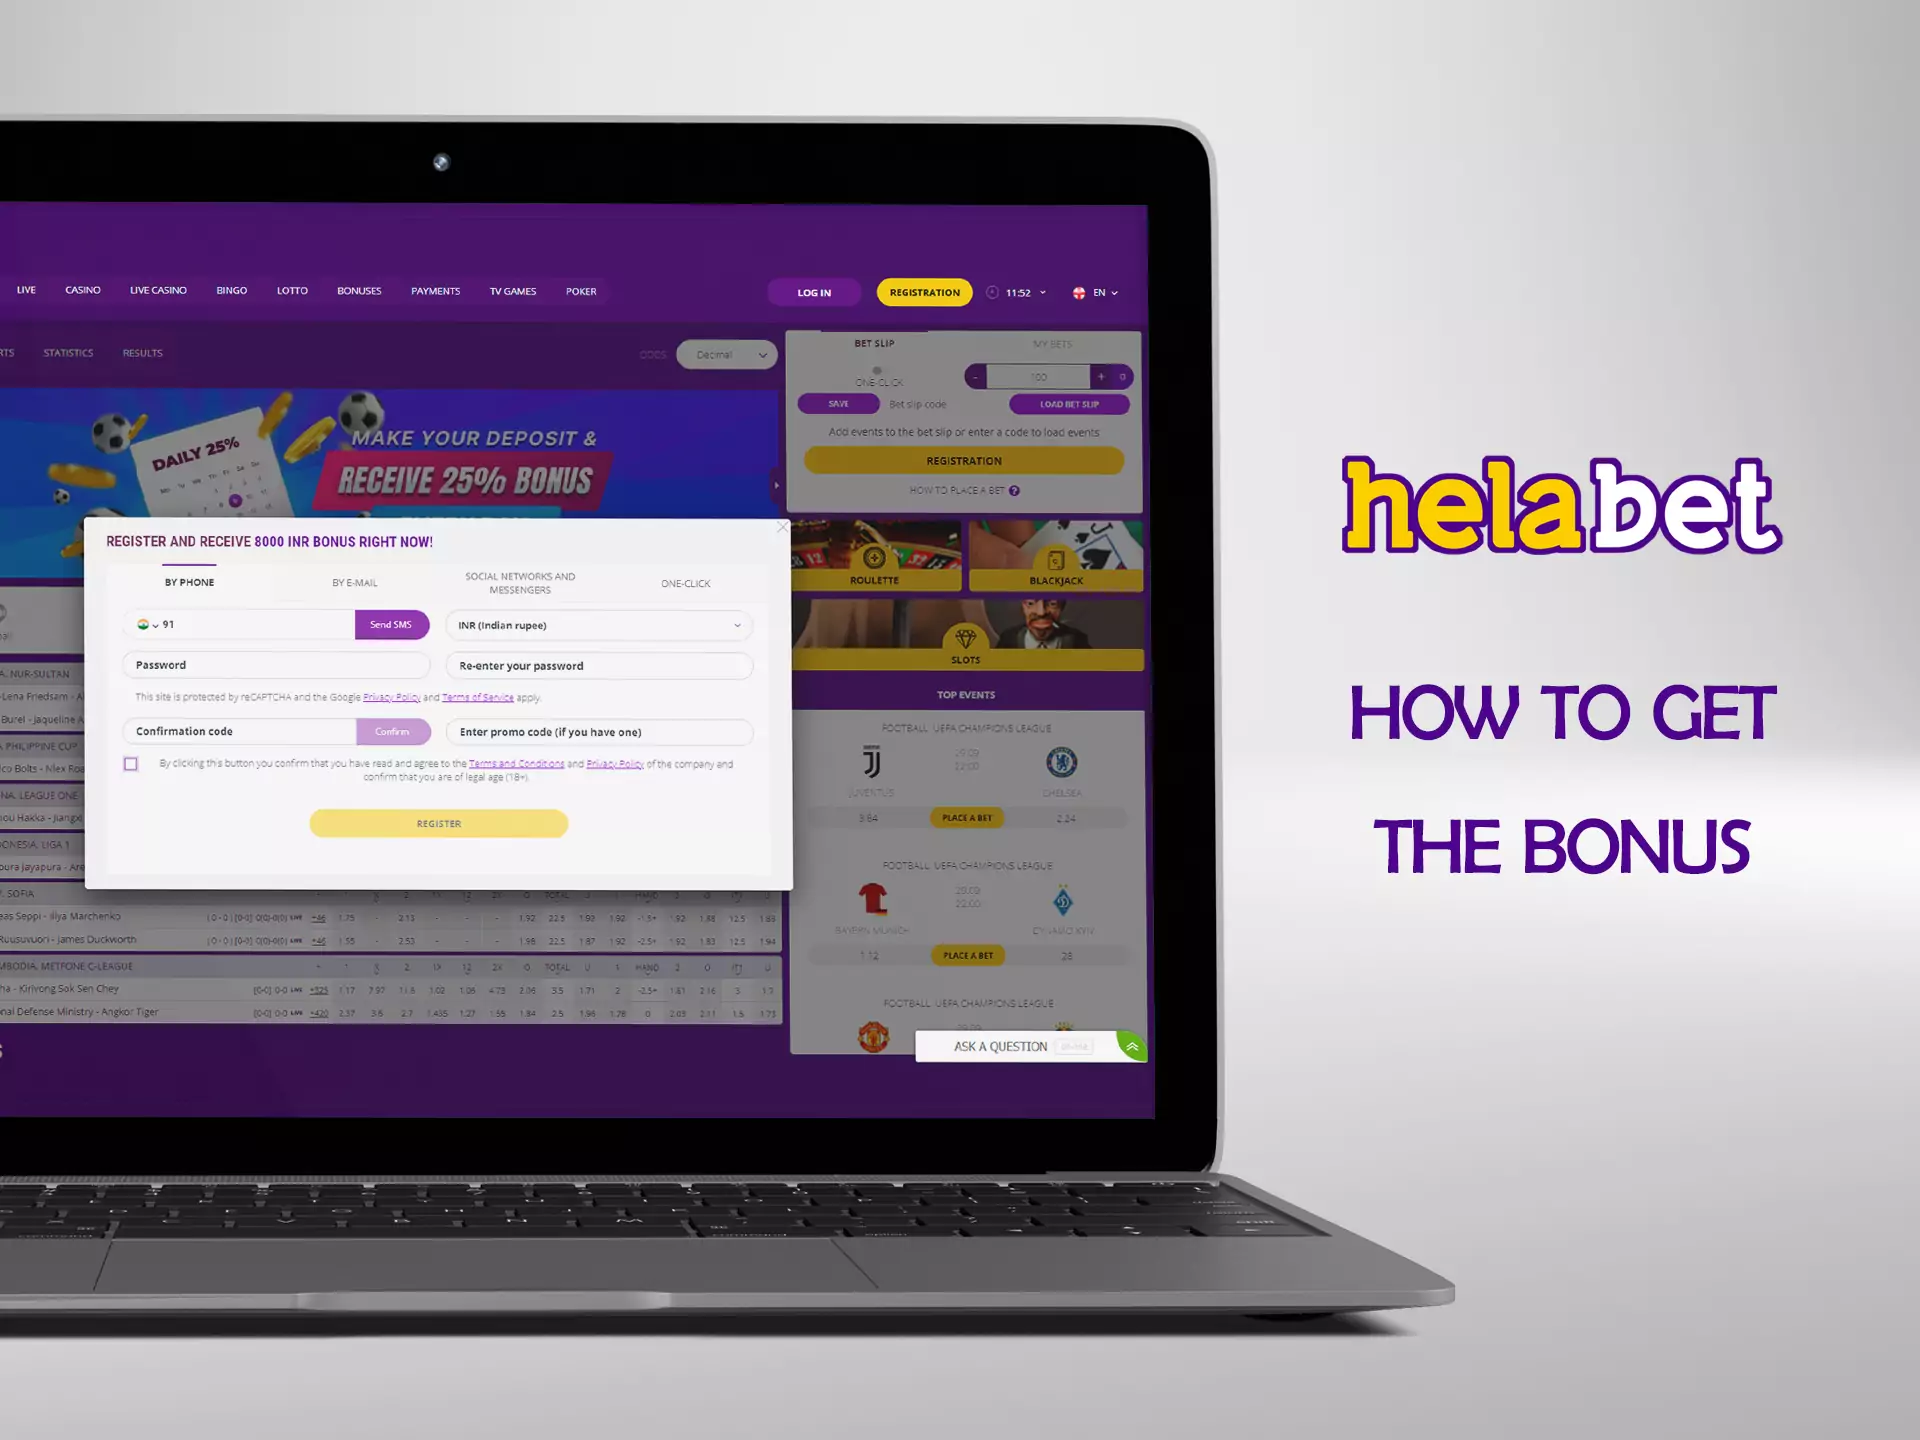 To get the welcome bonus firstly you have to sign up on the site.